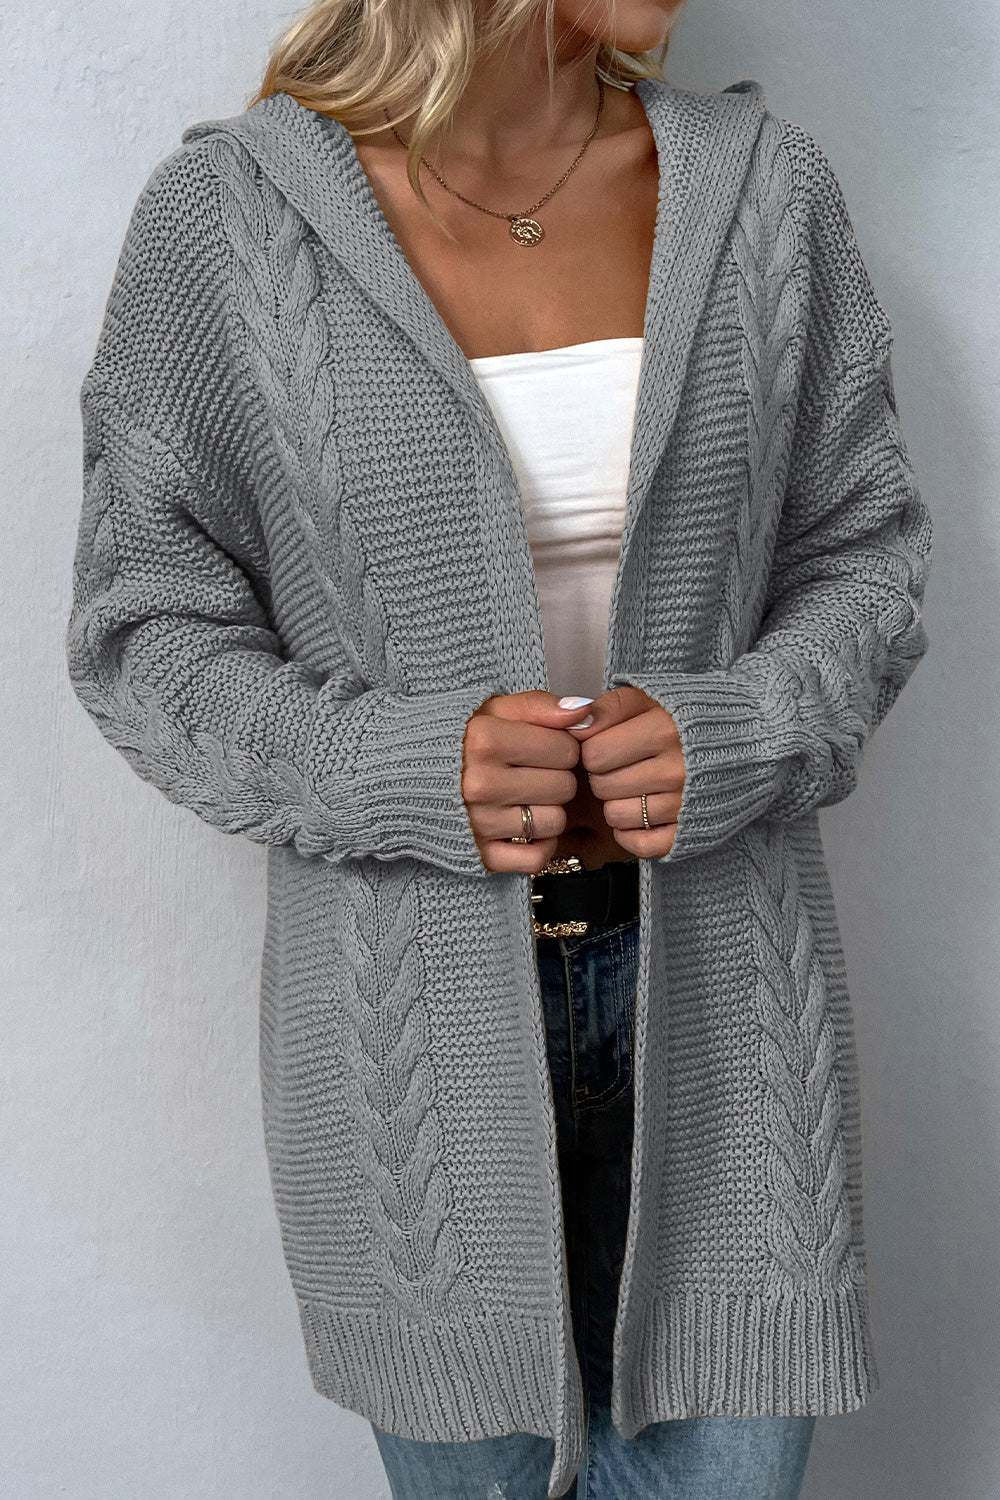 Cable-Knit Dropped Shoulder Hooded Cardigan - Light Gray / S - Women’s Clothing & Accessories - Shirts & Tops - 14